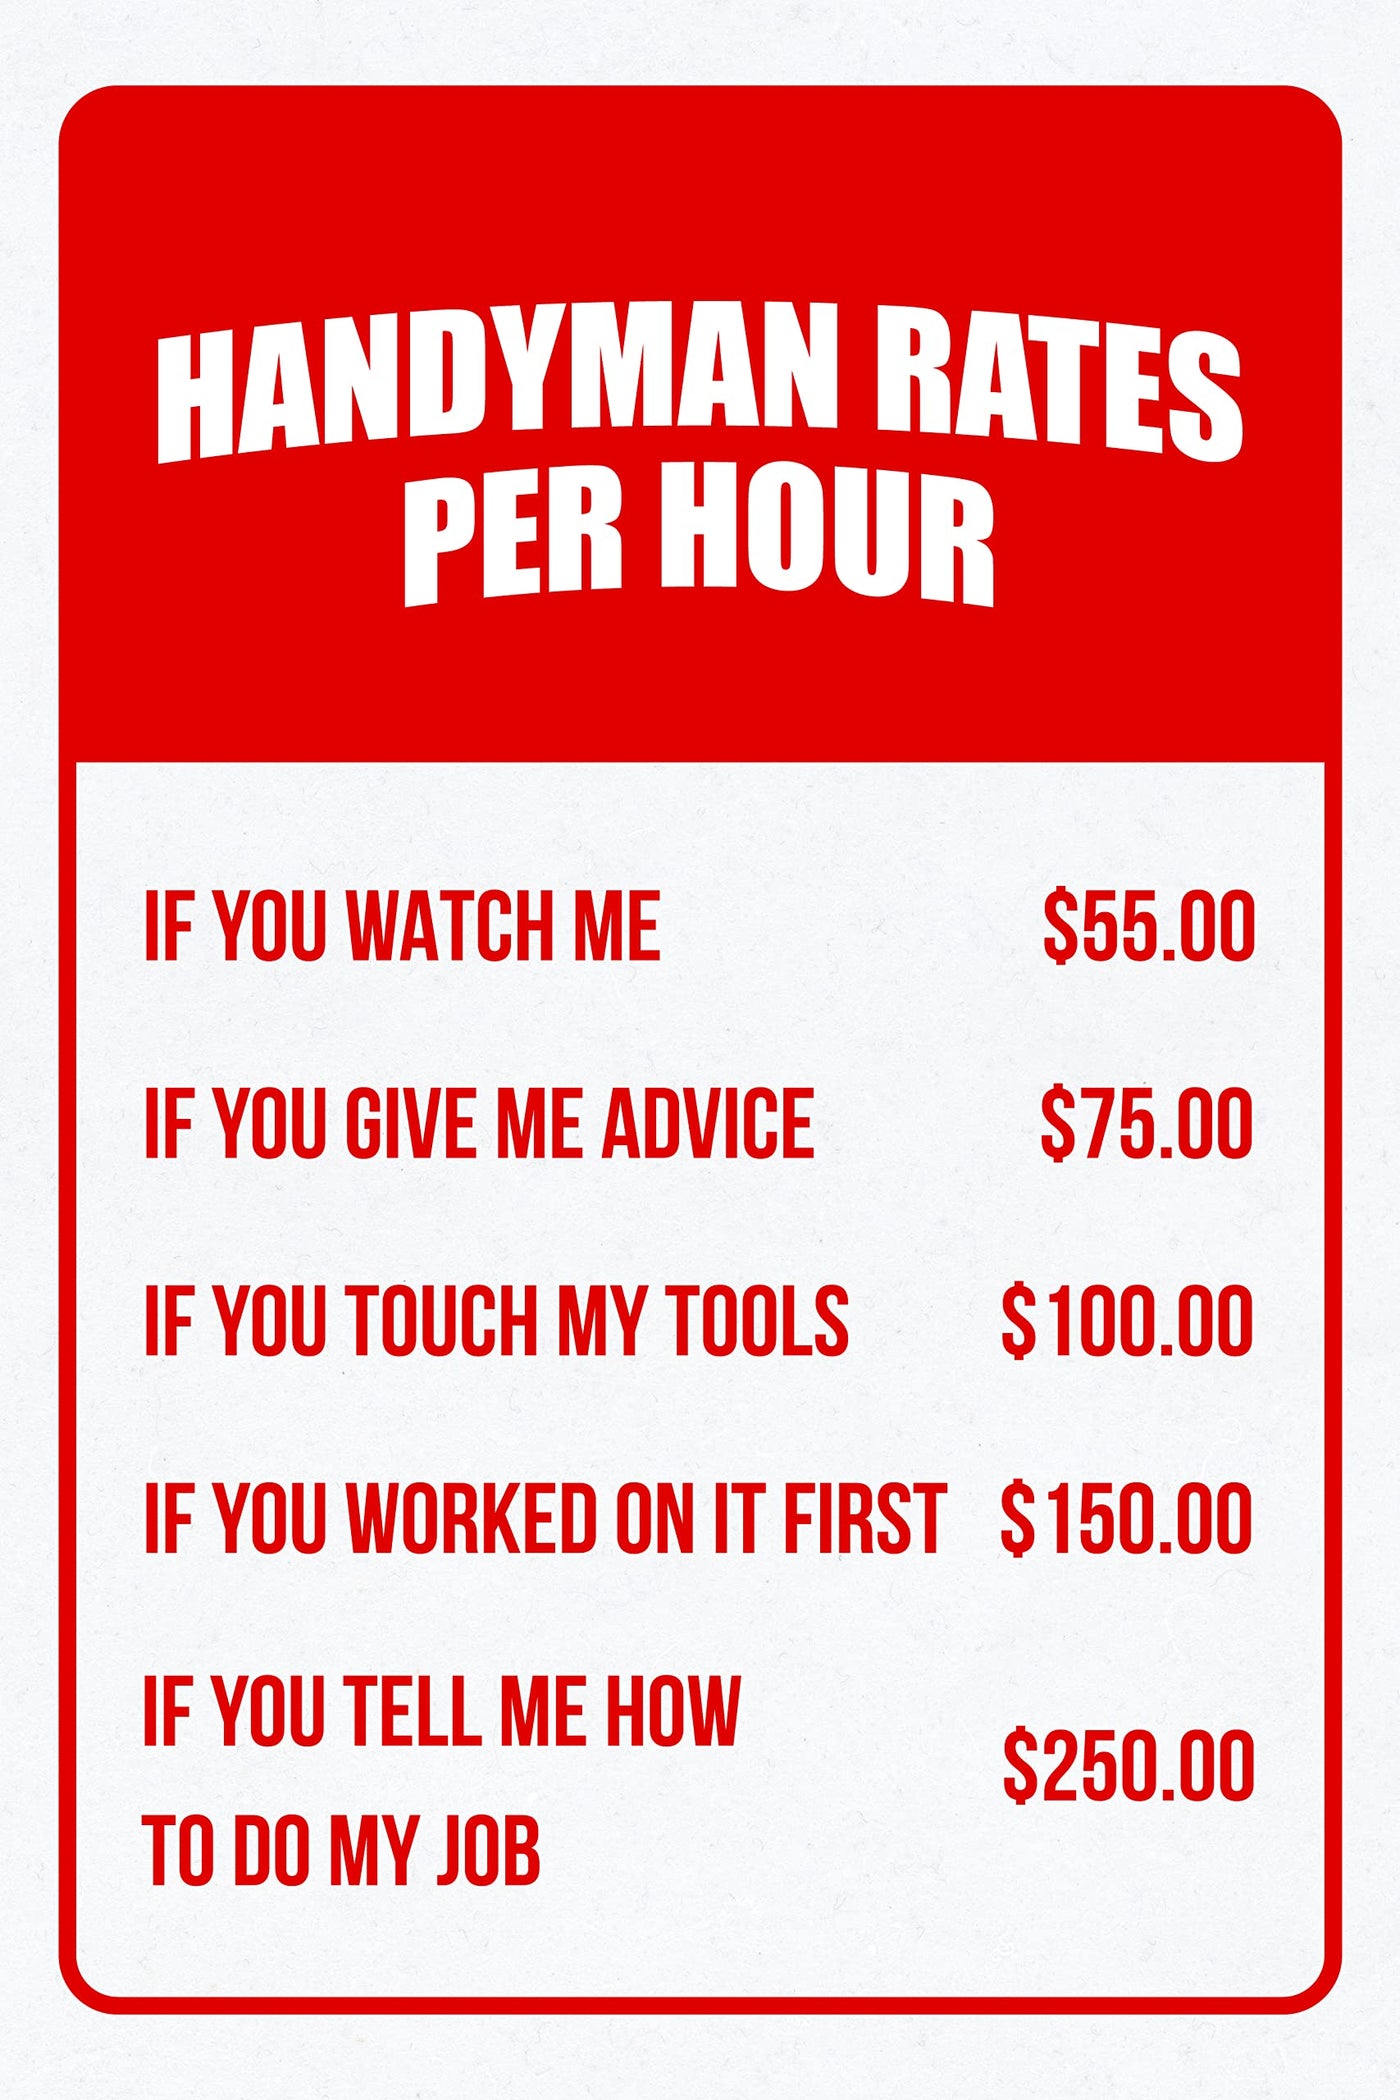 Handyman Rates Per Hour Metal Signs Vintage Wall Art -8 x 12" Funny Rustic Garage Sign for Bar, Man Cave, Tool Shop -Retro Tin Sign -Great Gifts for Home, Outdoor Decor & Mechanic Accessories!